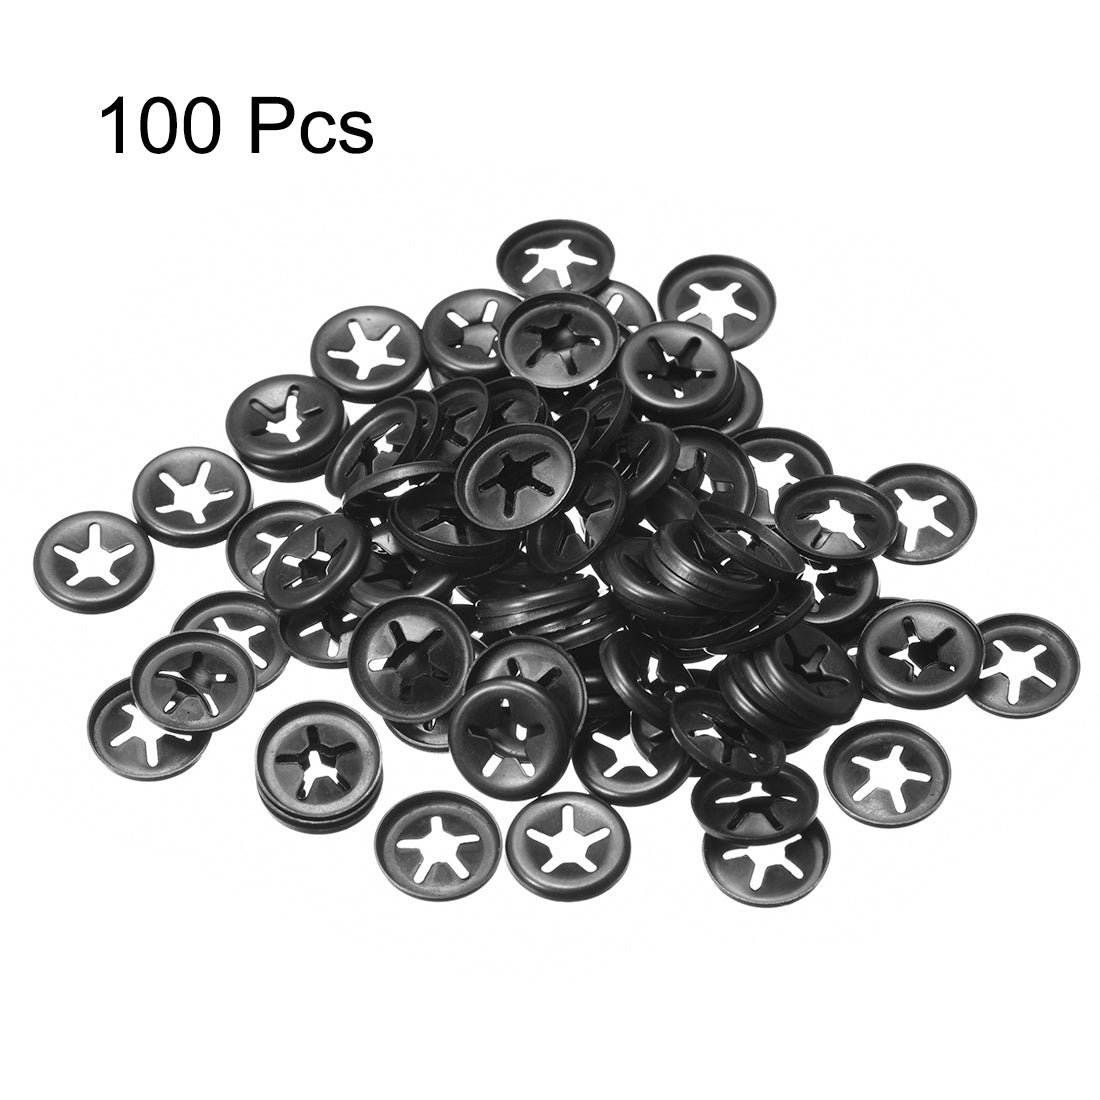 Uxcell Uxcell Star Locking Washers , M4 x12 Internal Tooth Push On Locking Washers Clips 5 Points Fasteners Assortment Kit 100pcs